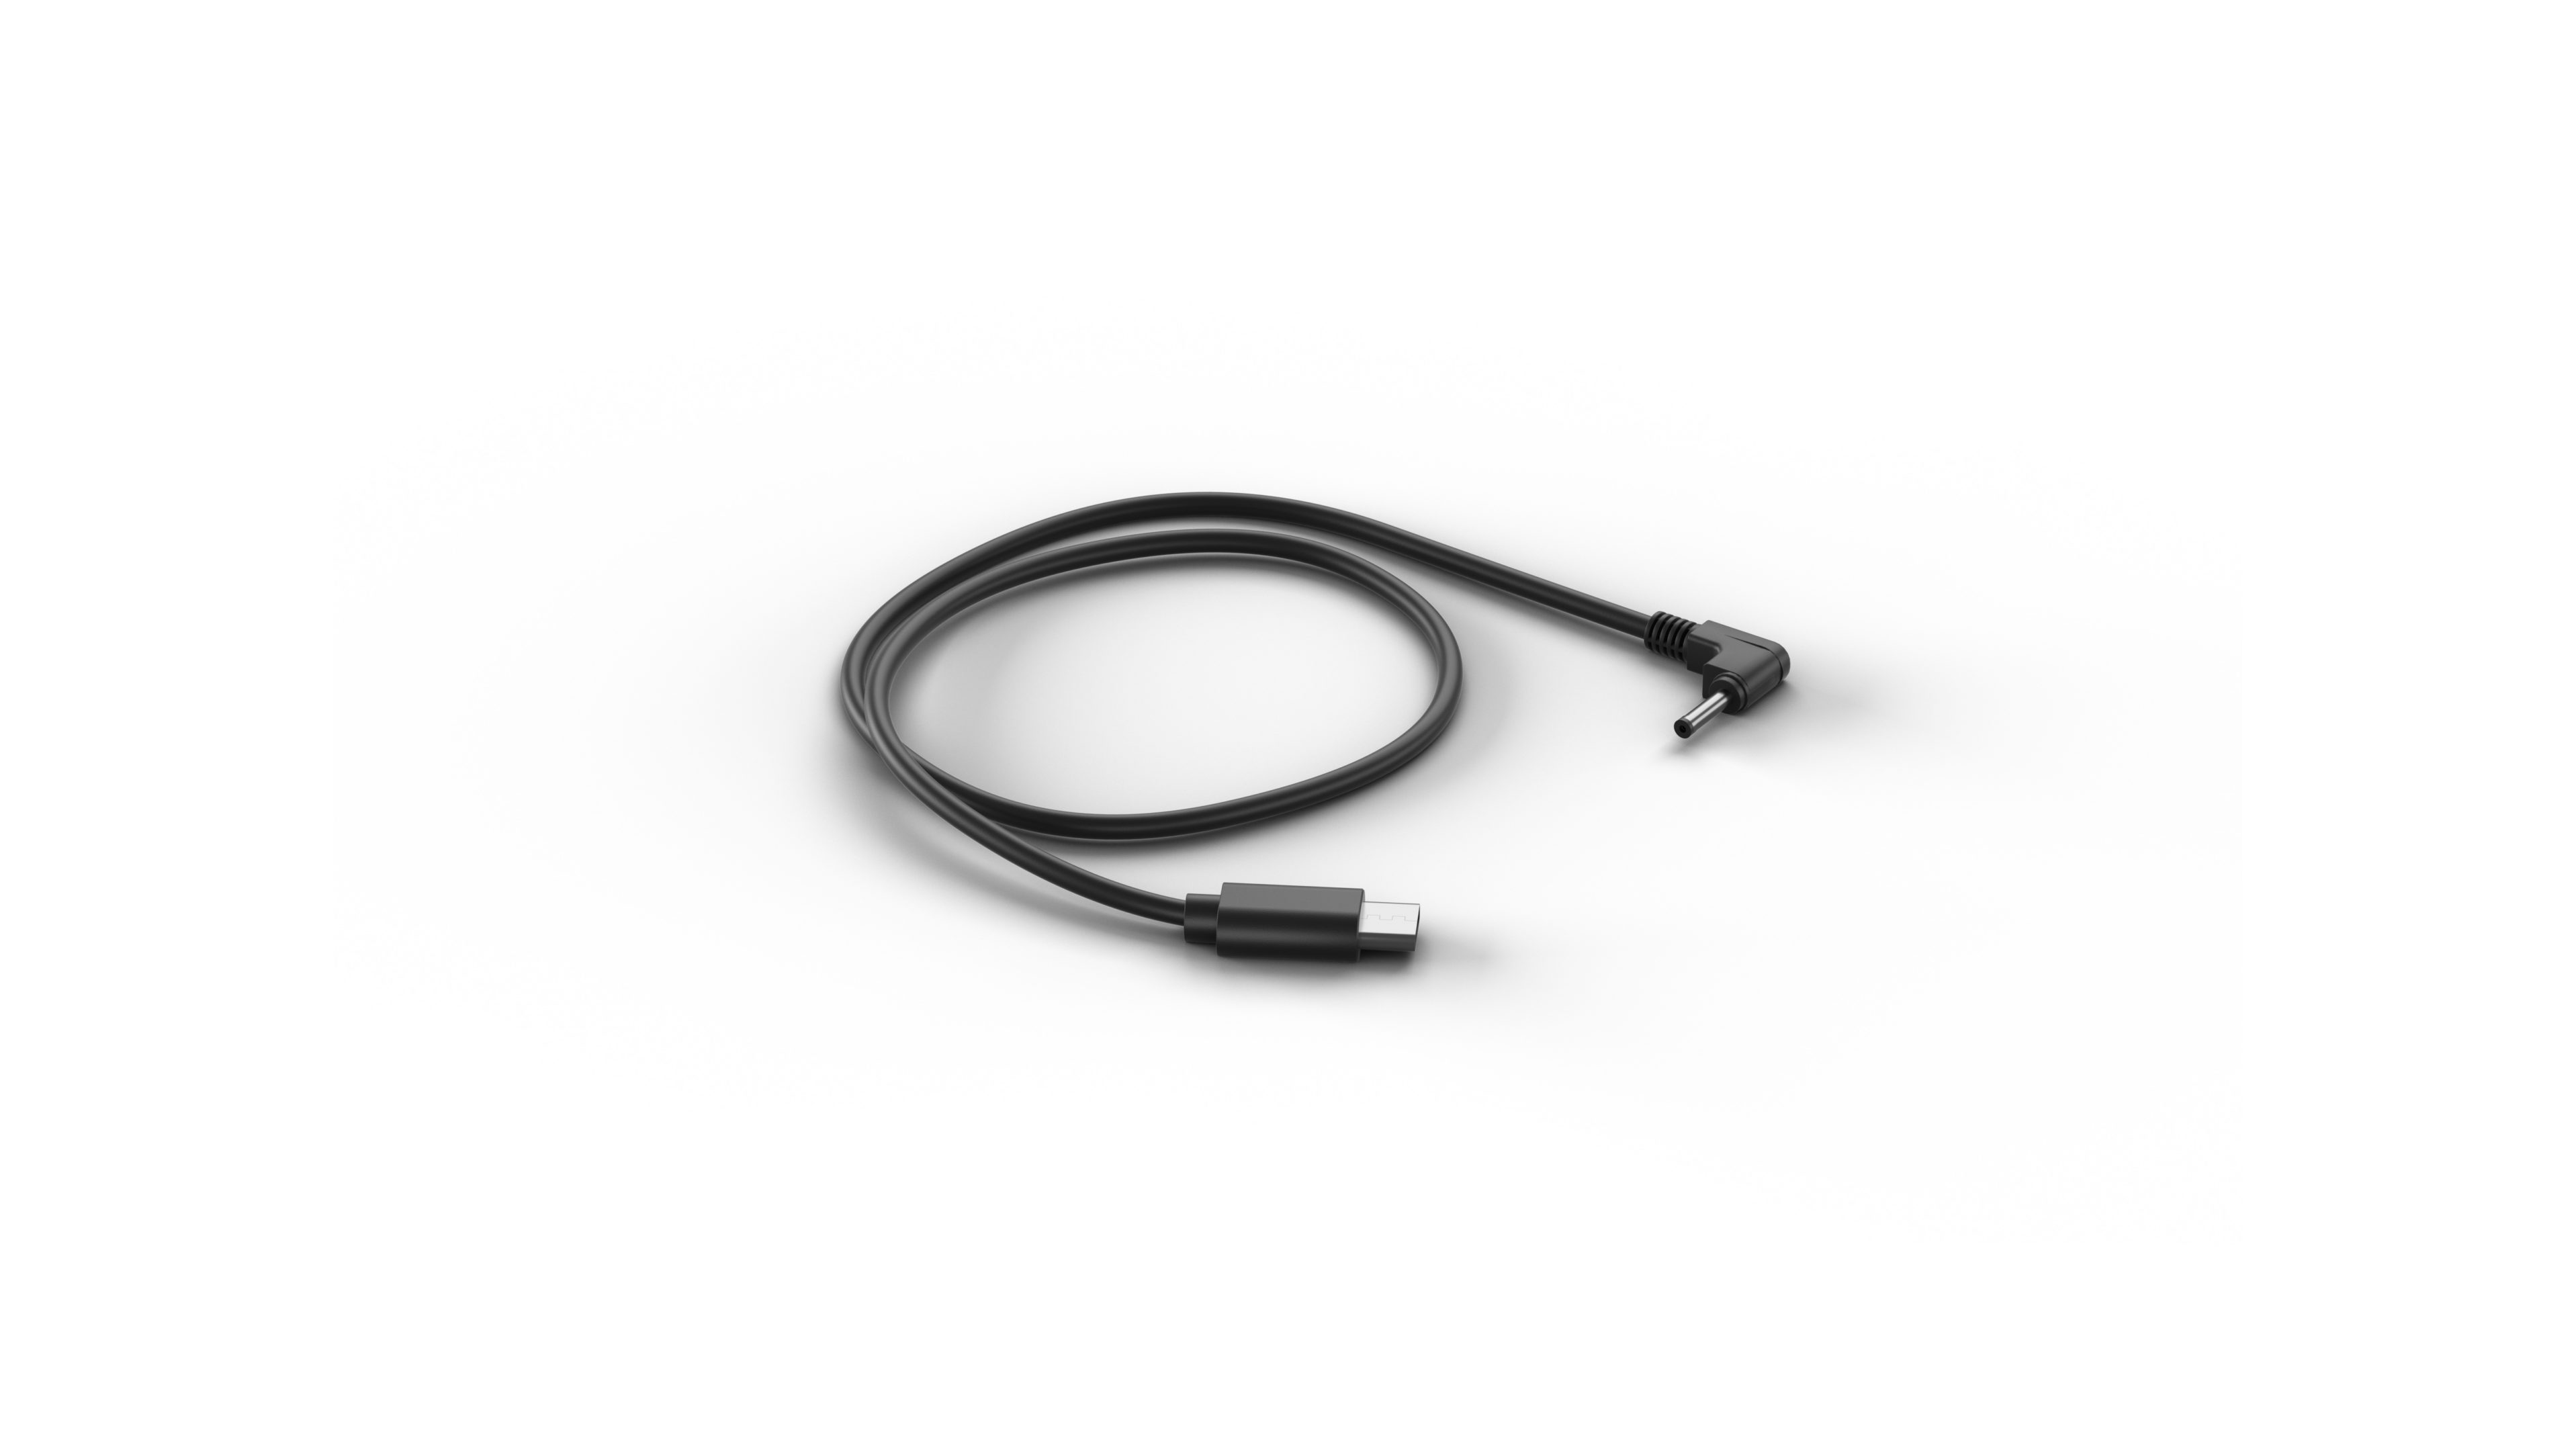 DJI USB-A to USB-C Charging Cable (50 cm)